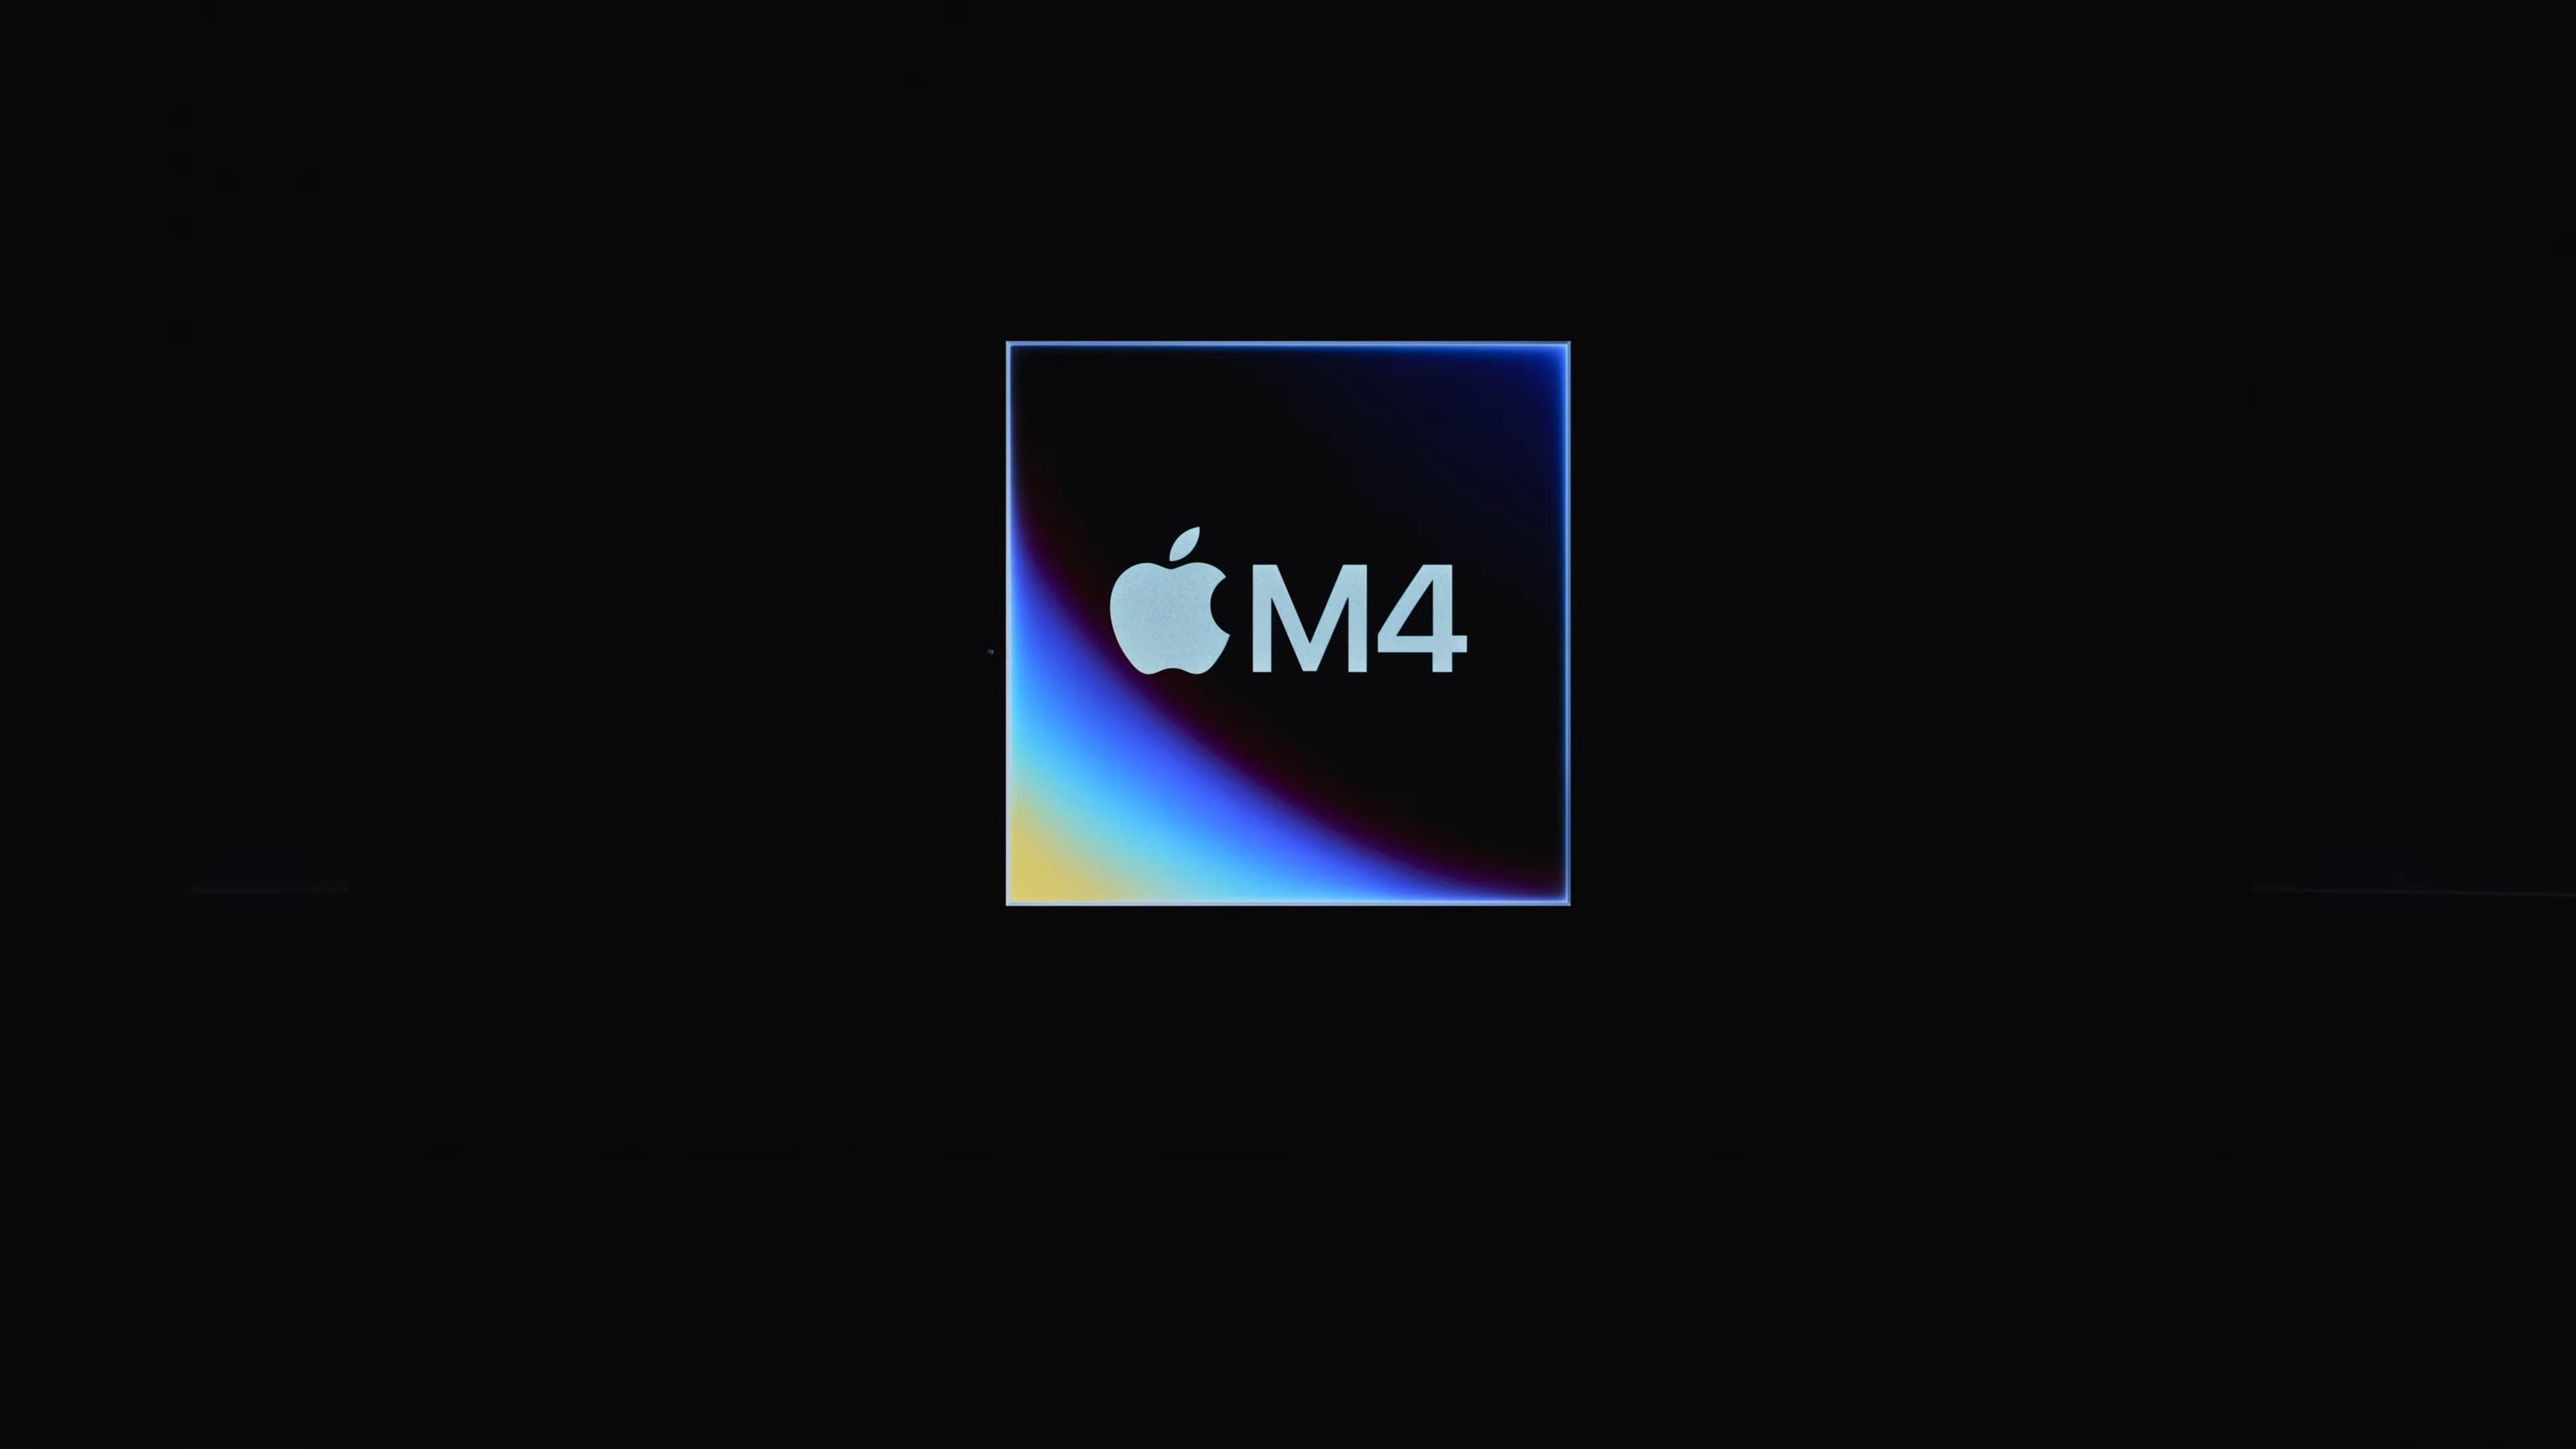 Apple's M4 chip is the biggest AI improvement for Apple yet